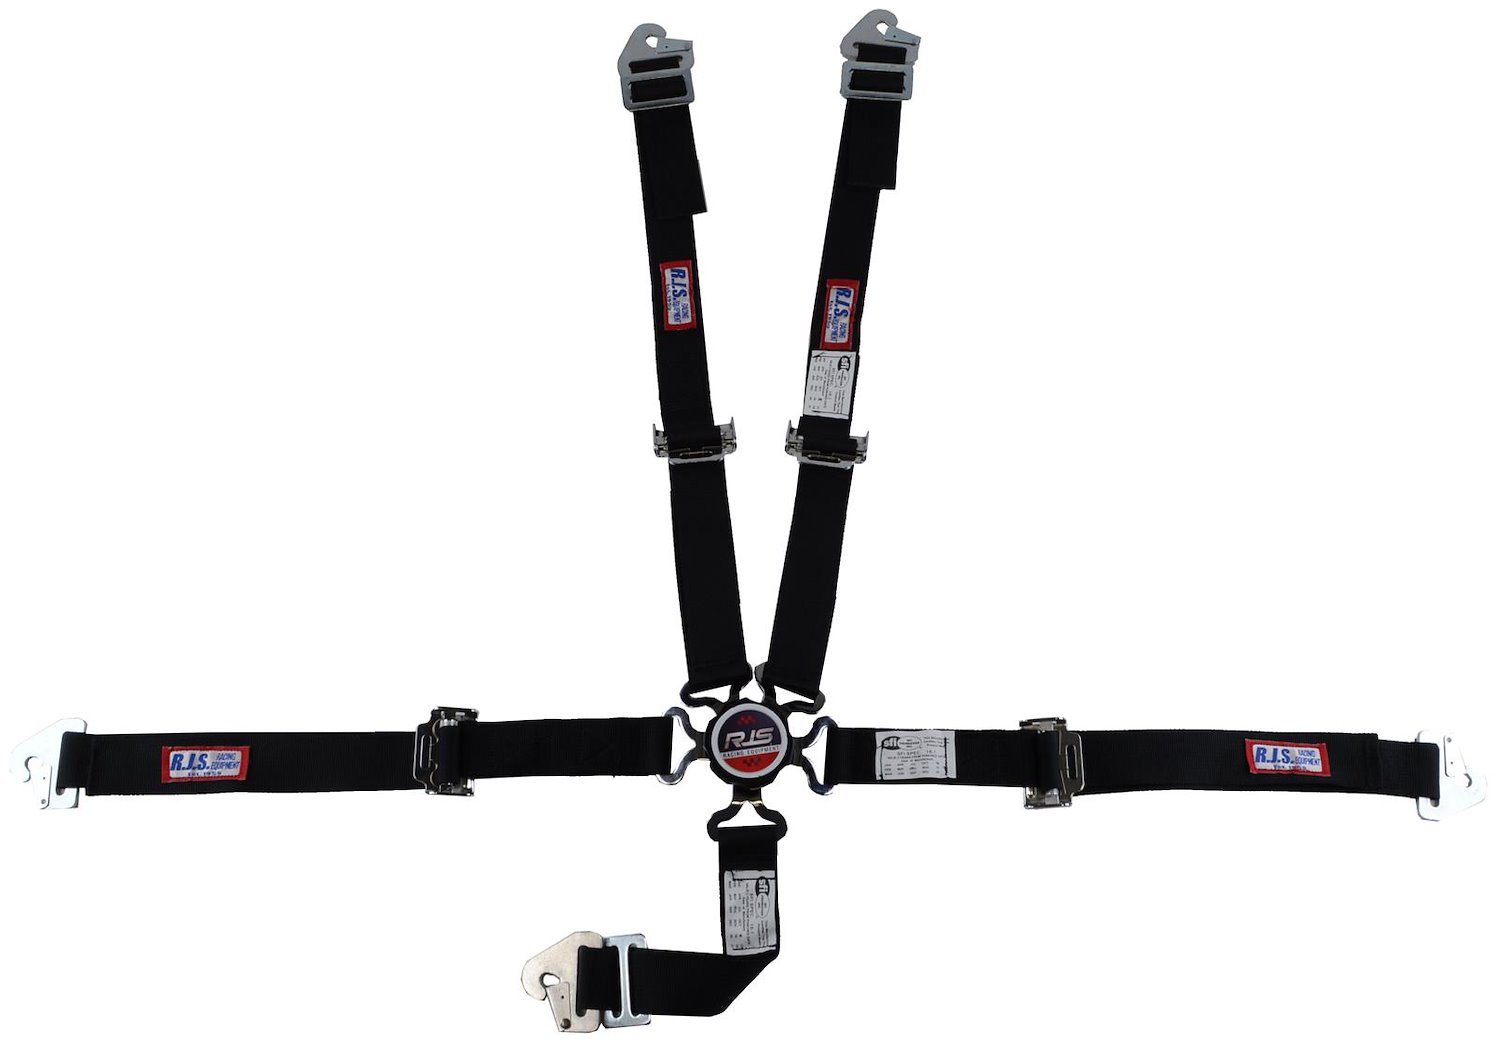 SFI 16.1 CAM-LOCK HARNESS 2 PULL UP Lap Belt 2 Shoulder Harness U ROLL BAR Mount 2 DOUBLE Sub ALL WRAP ENDS YELLOW